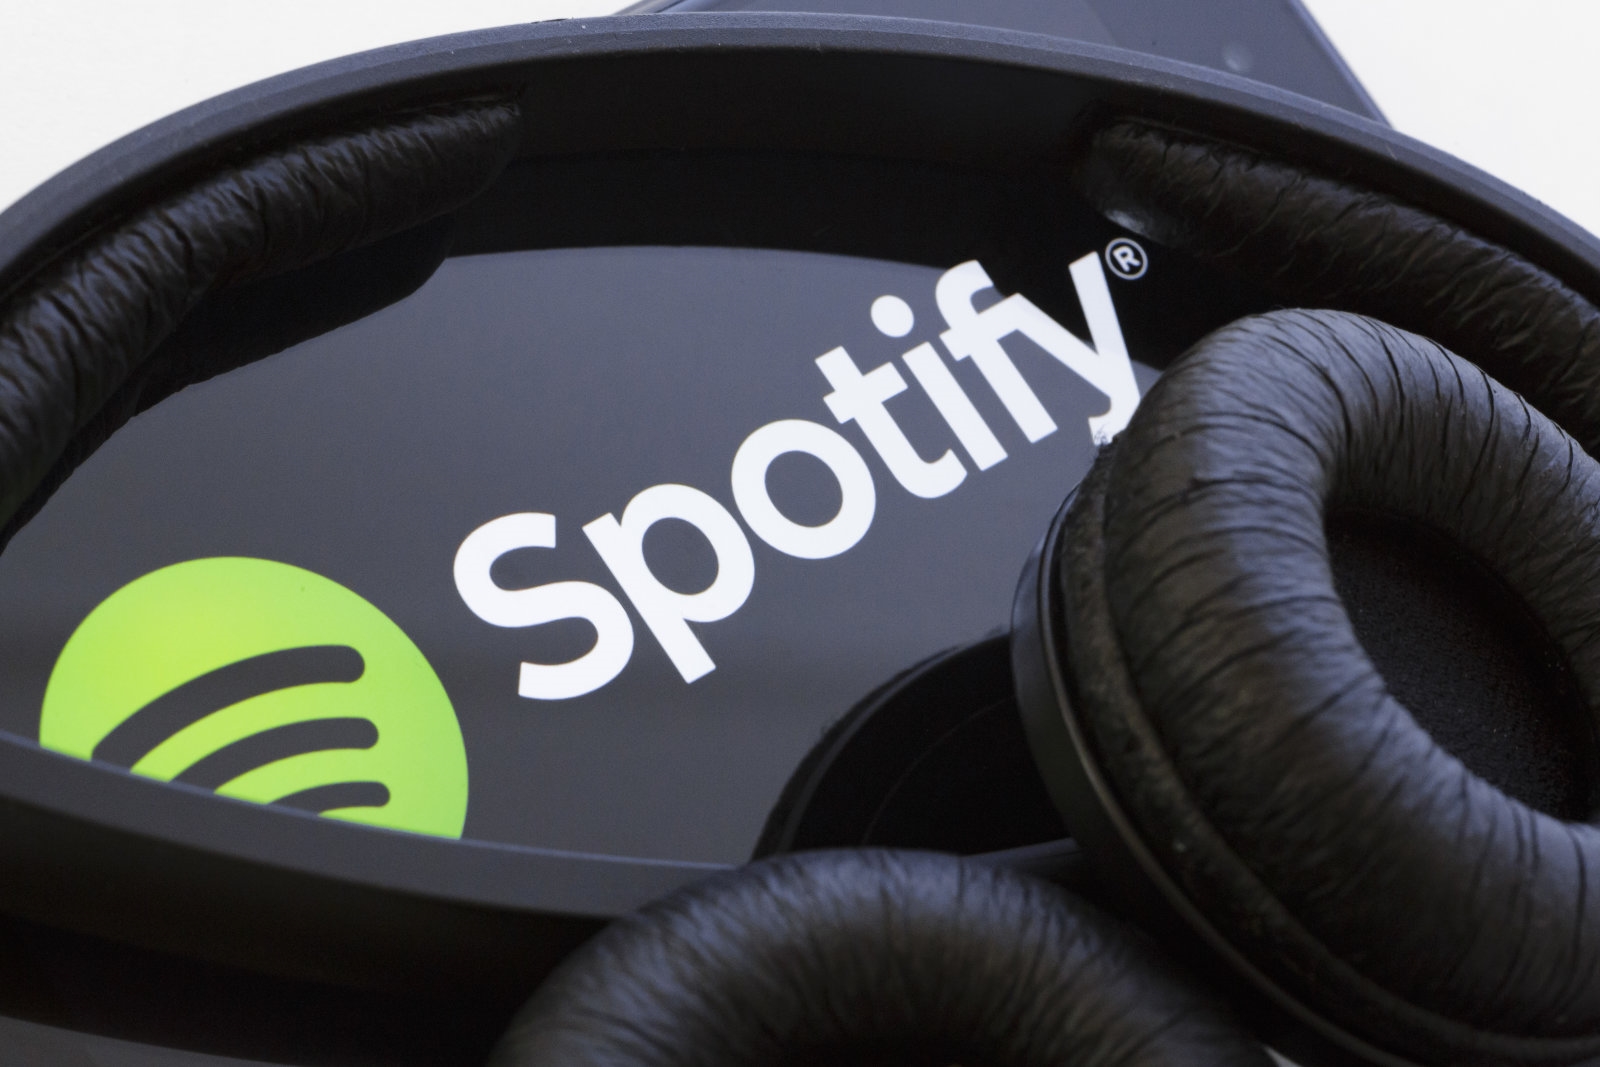 Spotify's in-car music player may go on sale this year | DeviceDaily.com